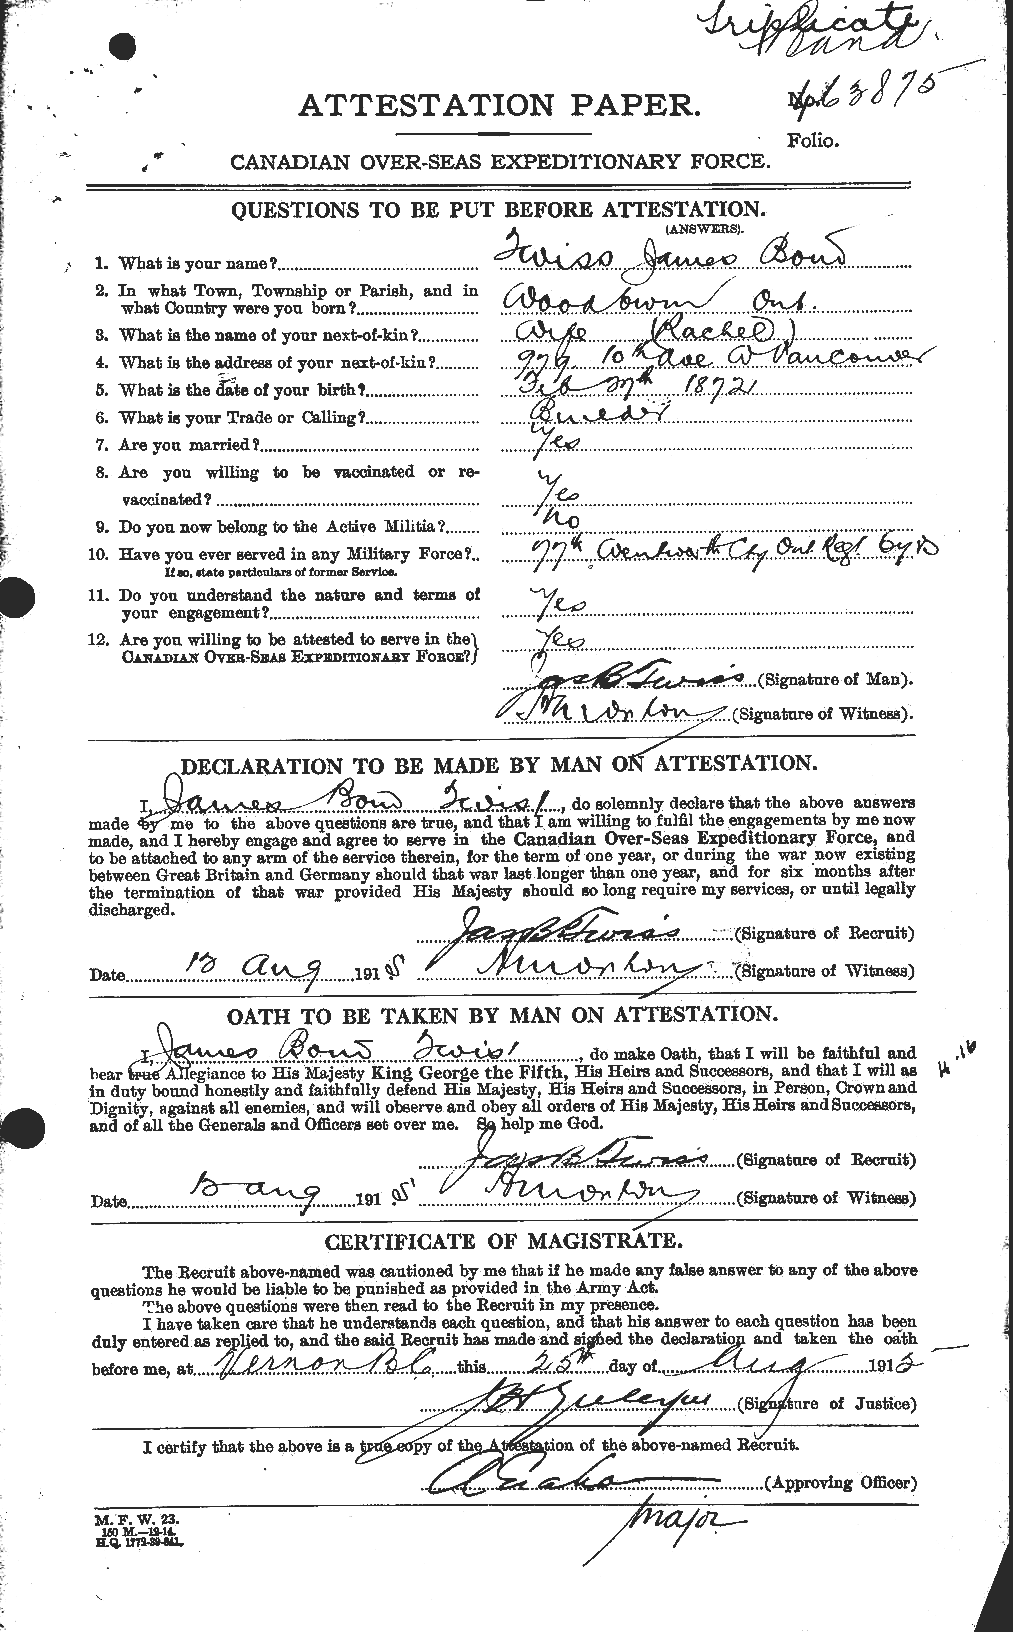 Personnel Records of the First World War - CEF 638896a